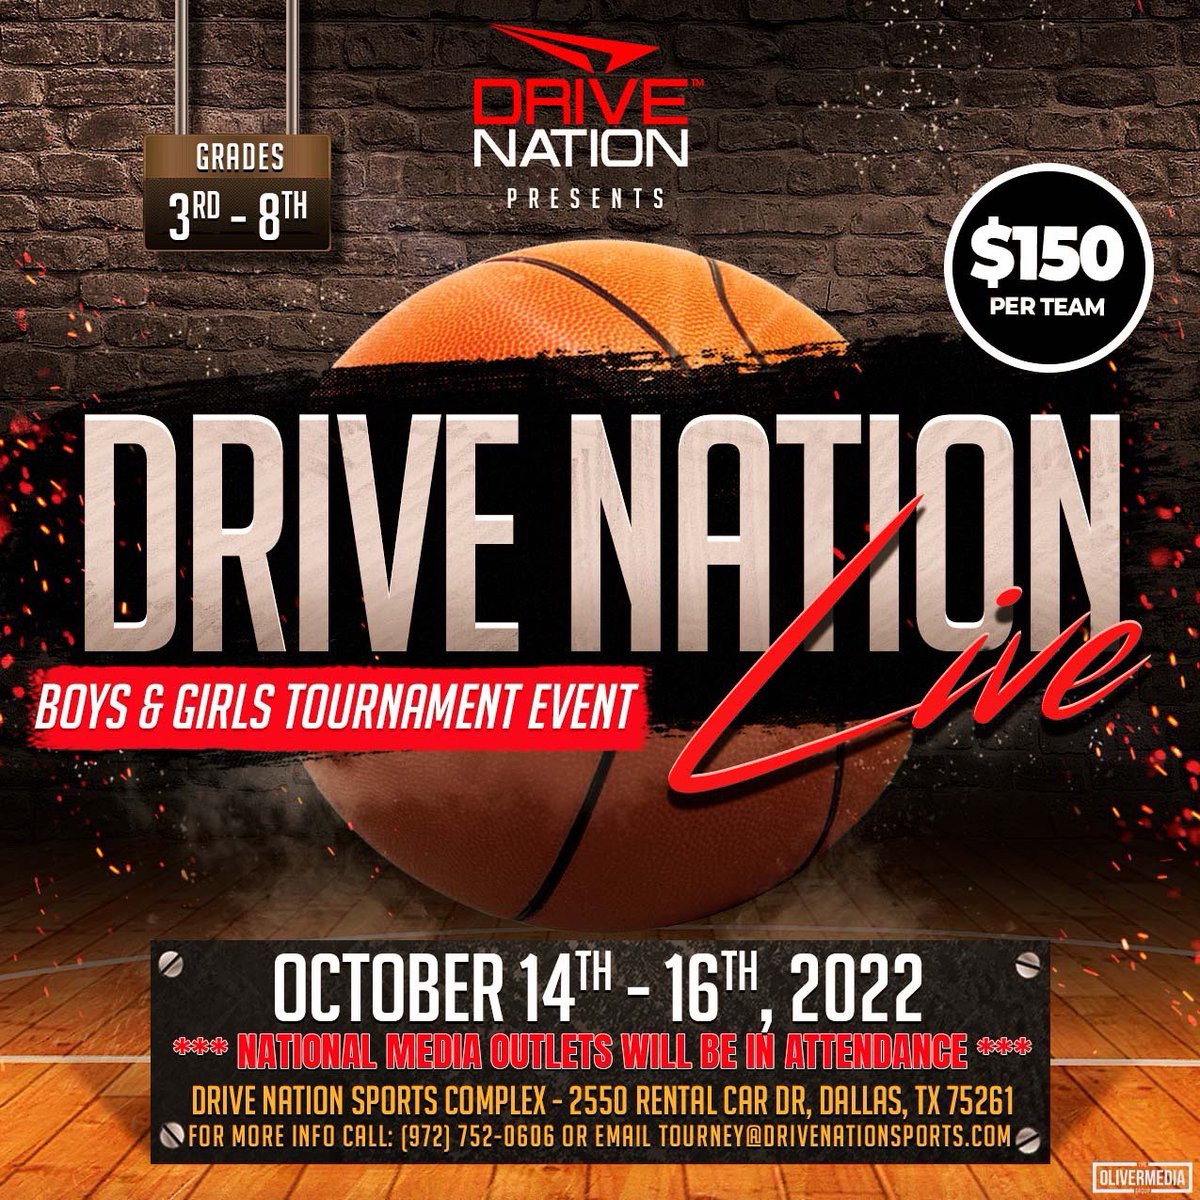 Coming at you LIVE! Our Drive Nation’s boys and girls tournament event, Oct. 14-16. REGISTER TODAY at drivenationsports.com/upcoming-tourn… #DriveNationBasketball #DFWtournaments #DriveNationLive